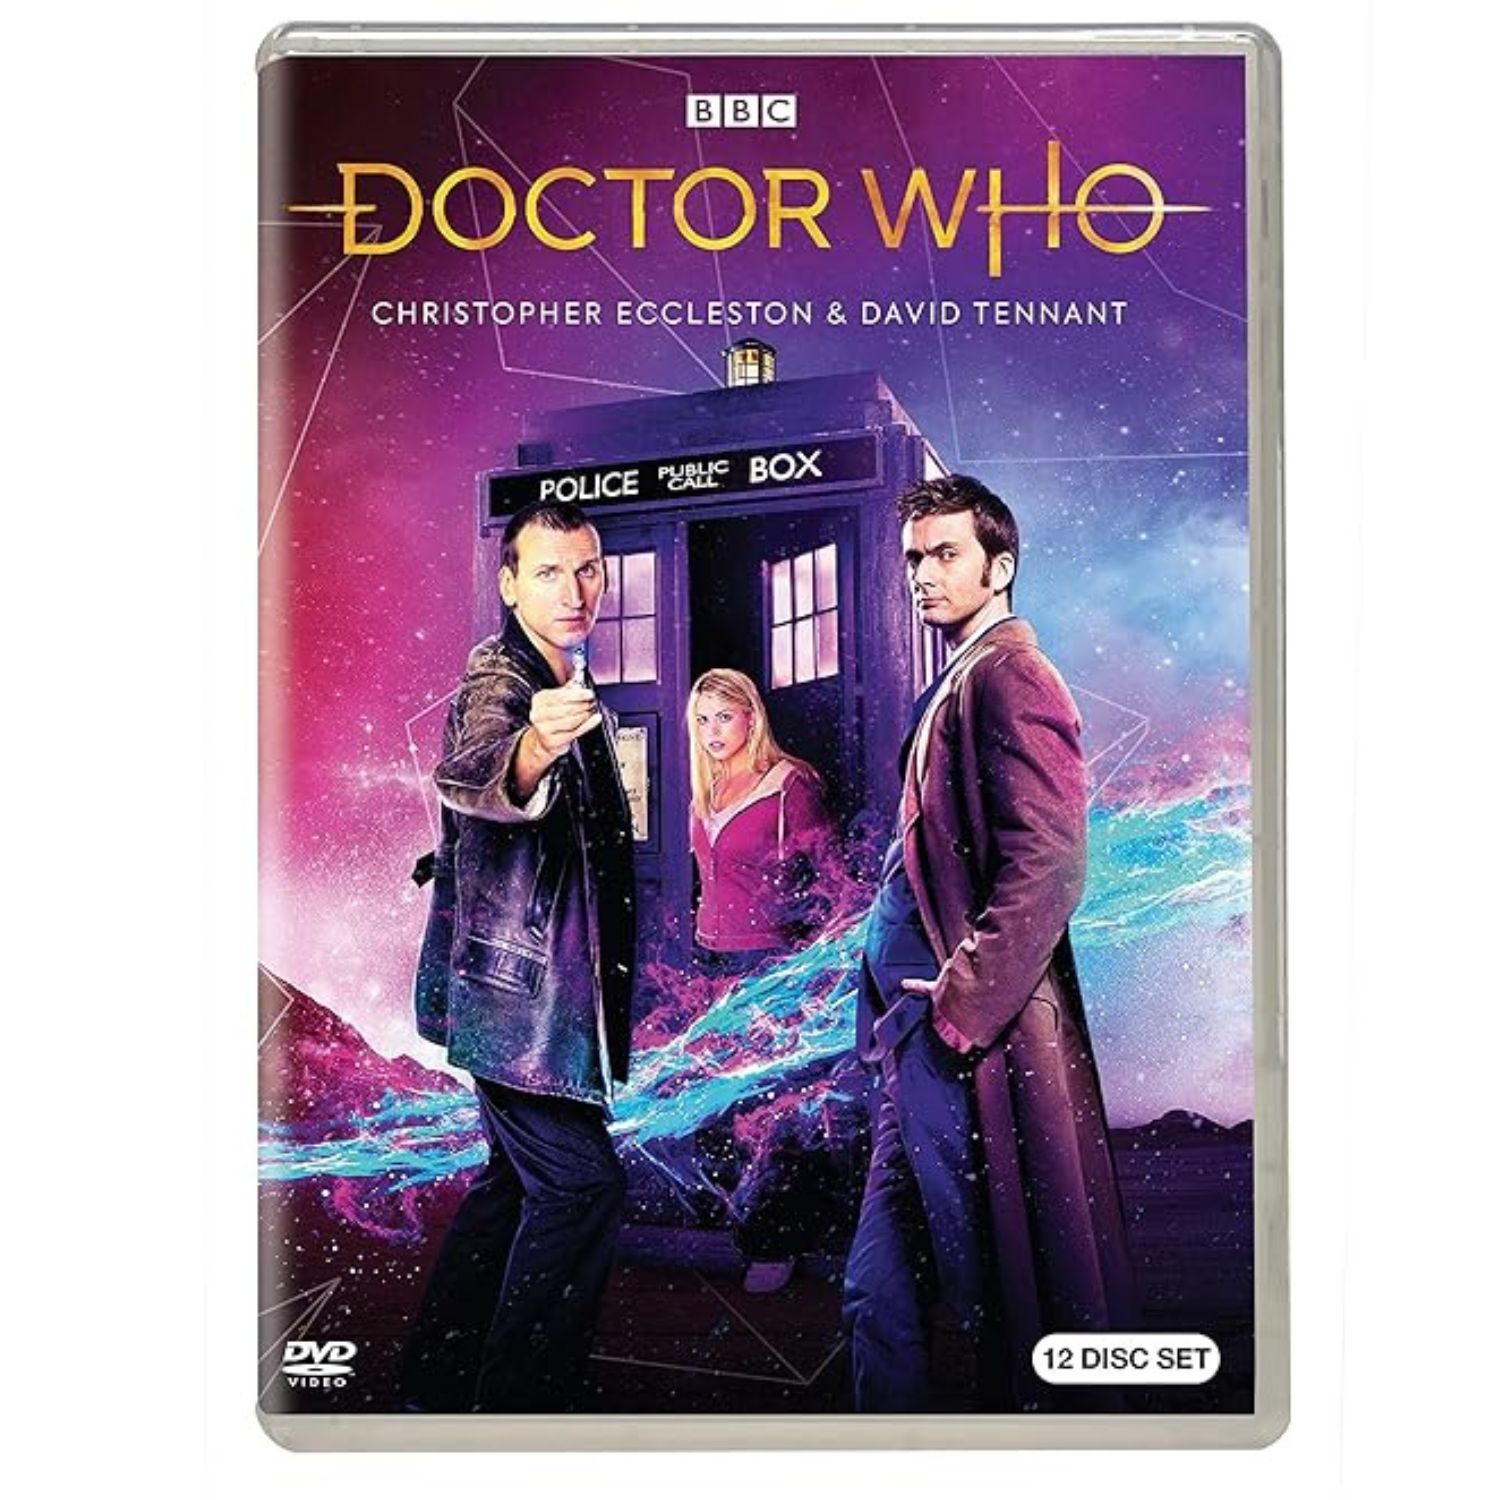 Doctor Who:Christopher Eccleston & David Tennant DVD Collection cover